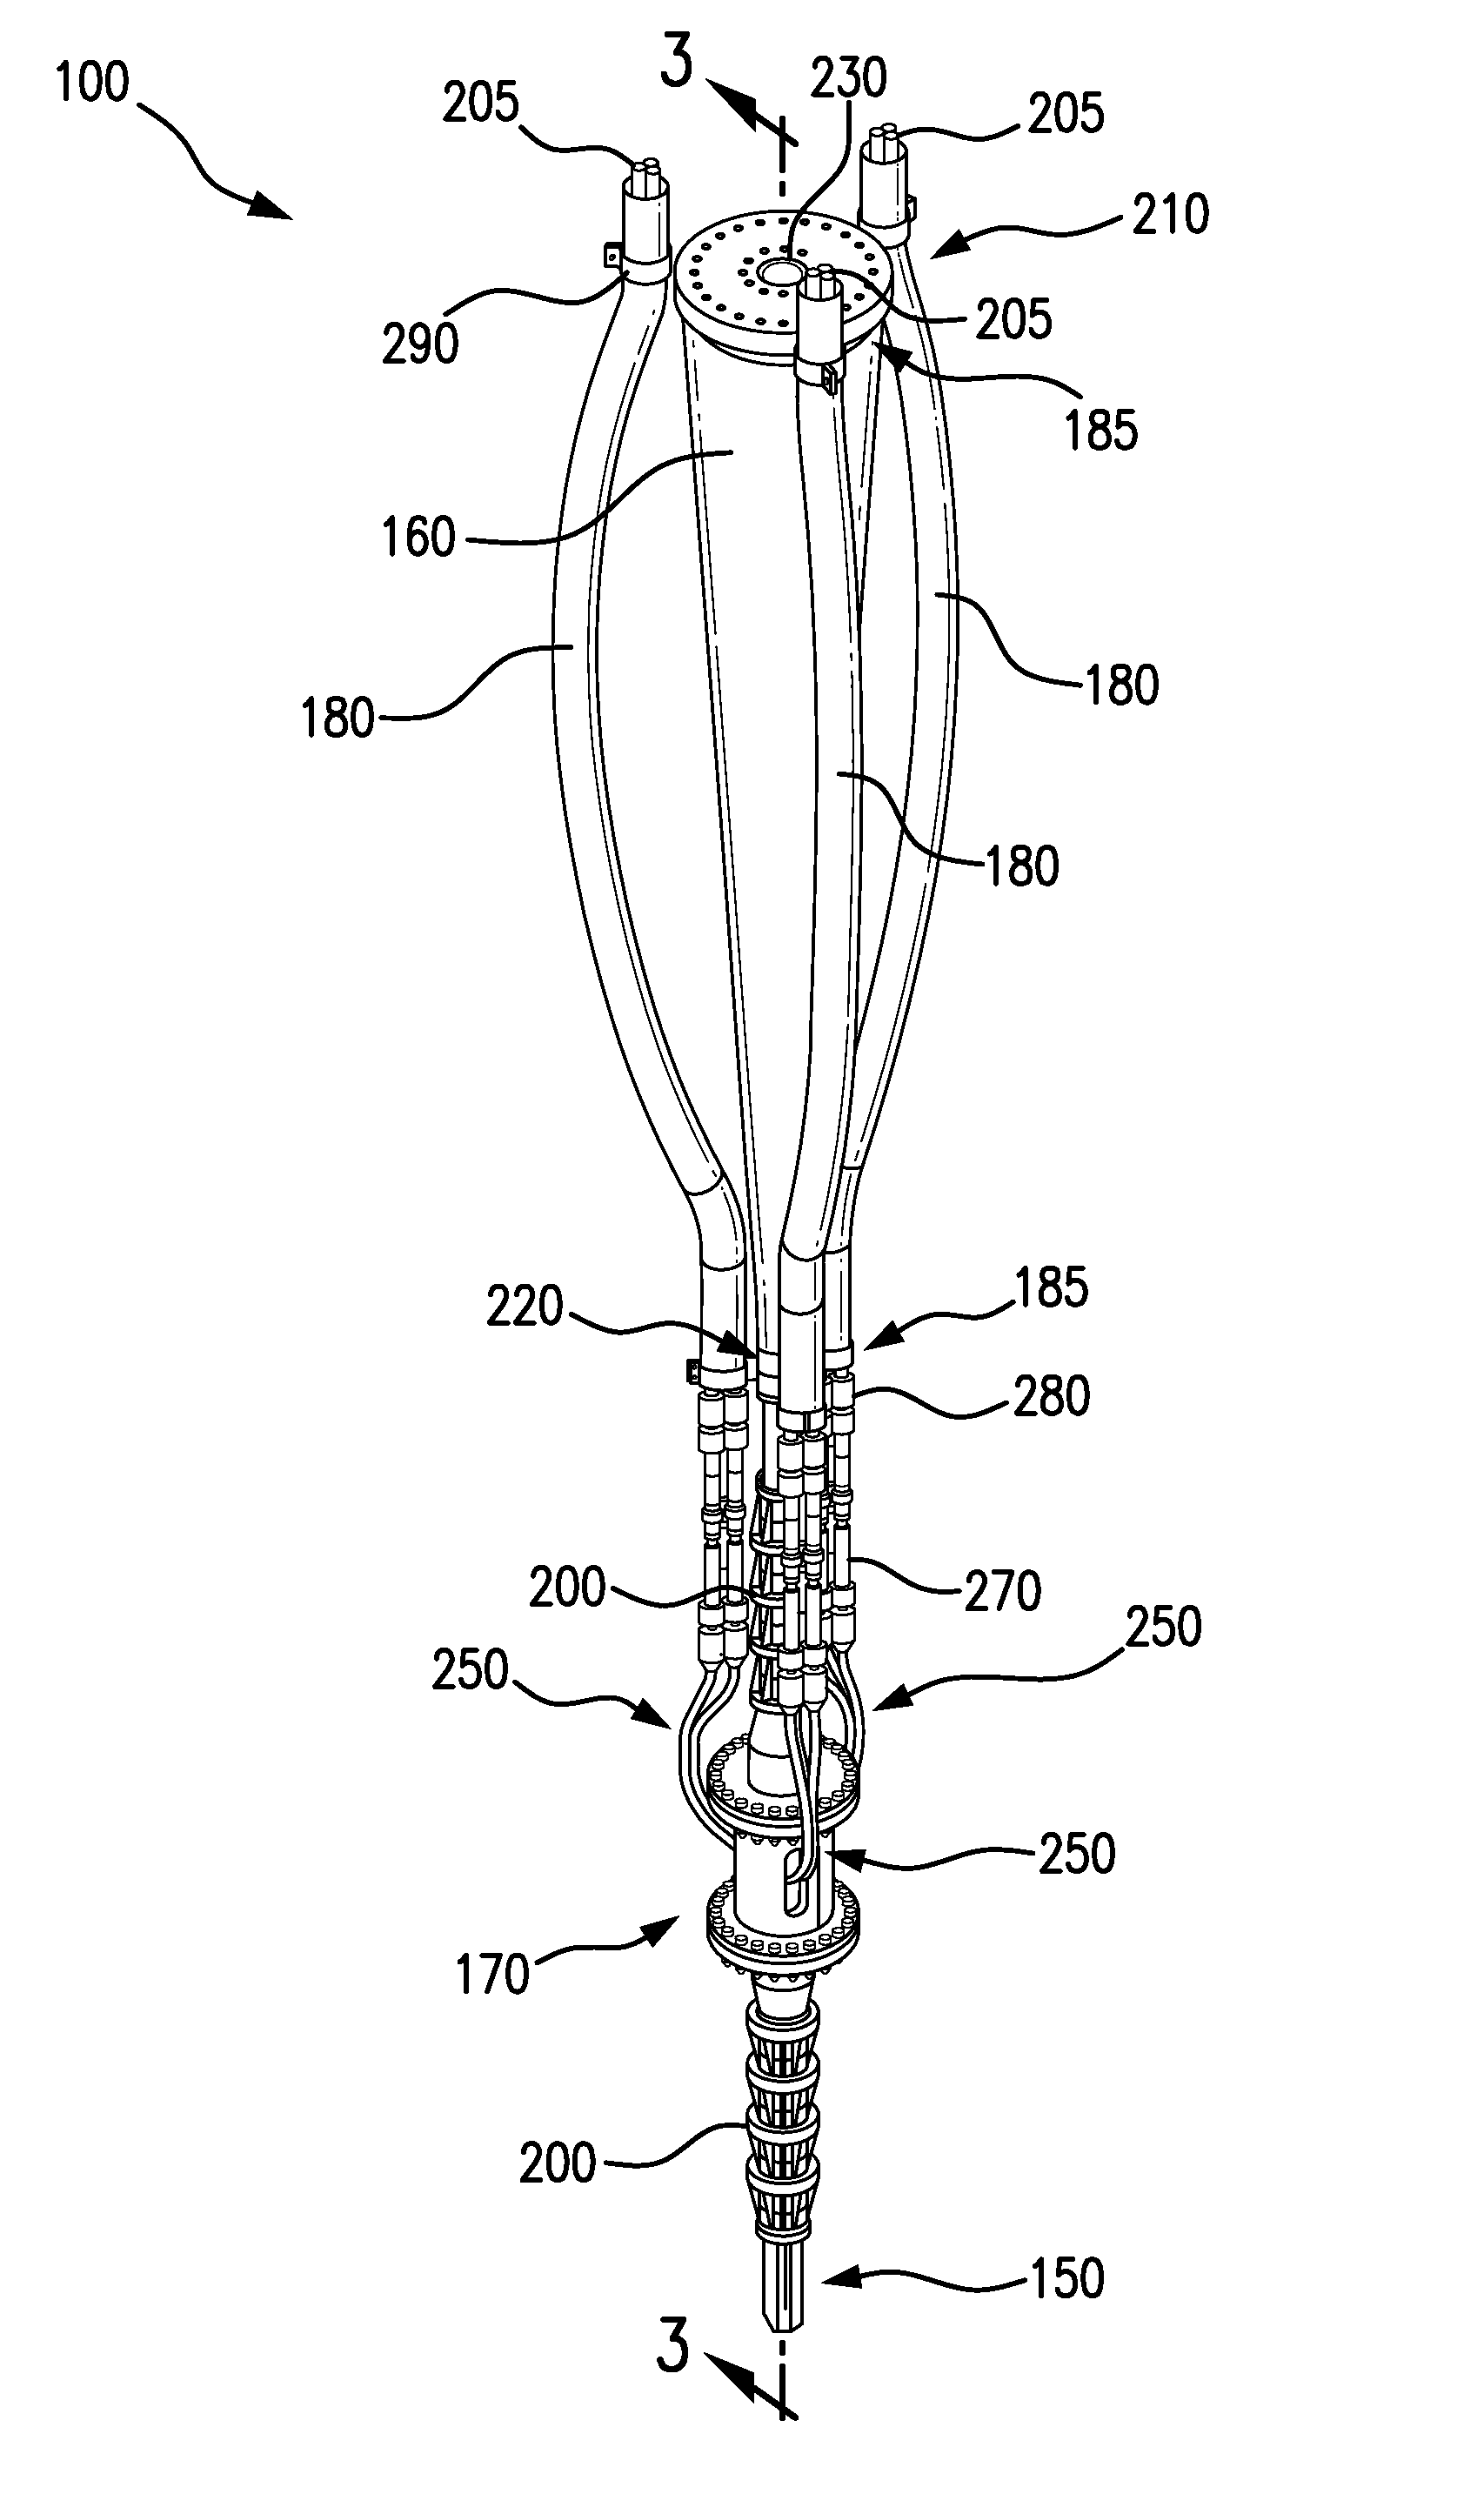 Subsea umbilical system with cable breakout